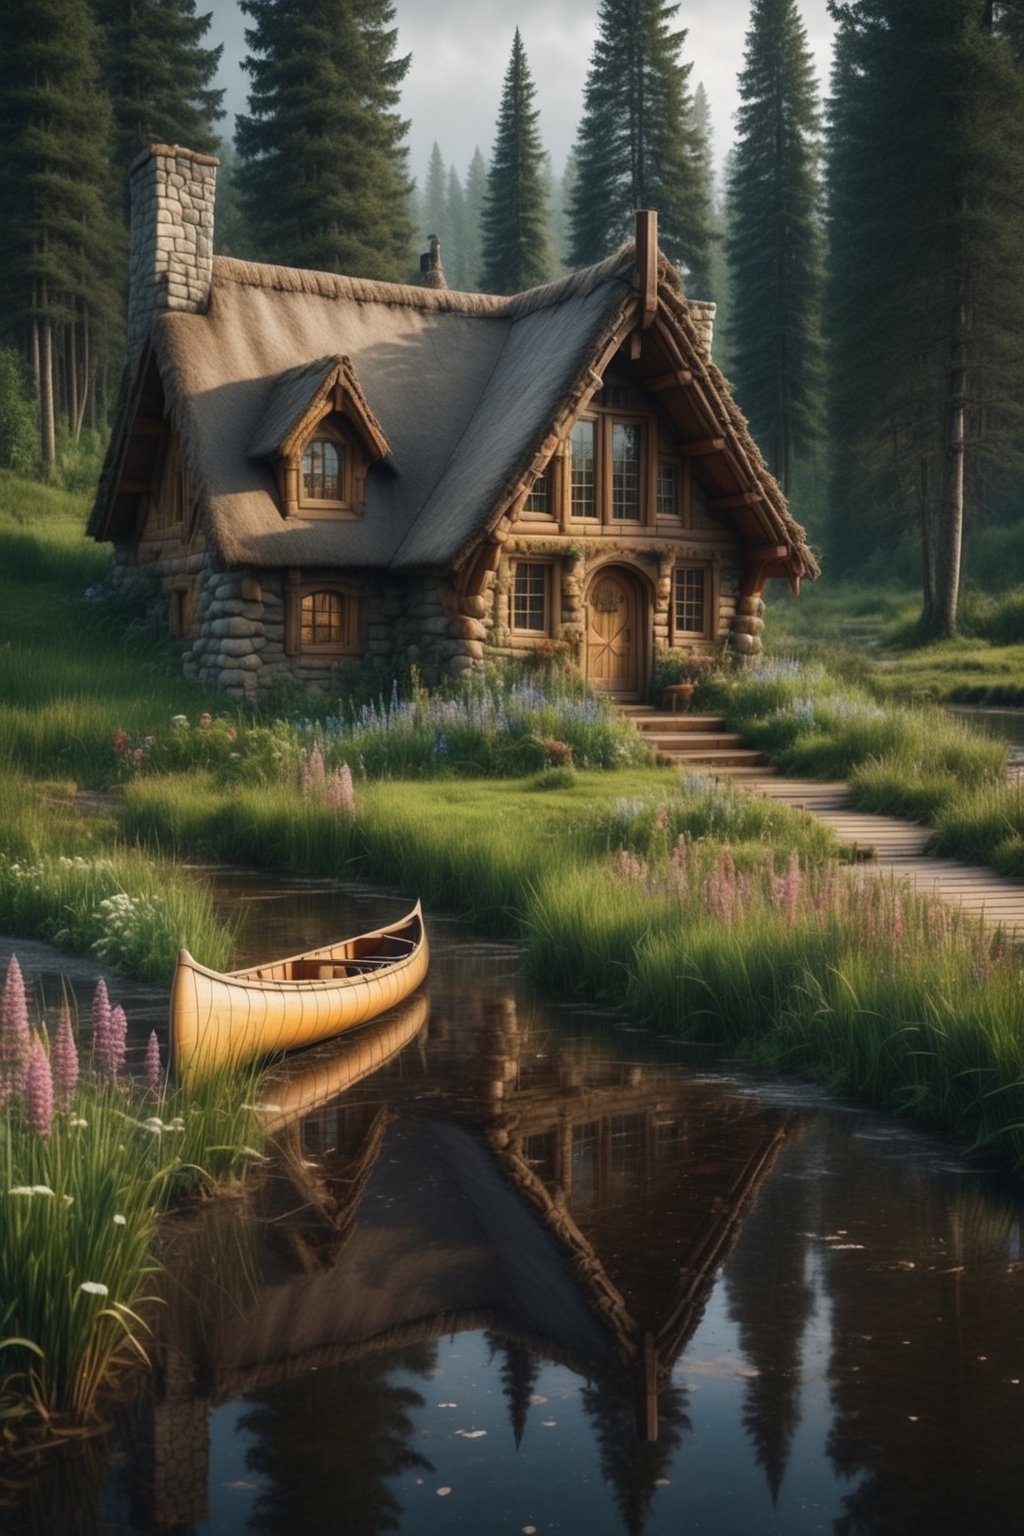 //quality, (masterpiece:1.4), (detailed), ((,best quality,)),//a cozy log cabin, medieval fantasy vibe, wild flowers, tall grass, pathway, canoe, river, overcast weather, tress, pine, sequia forest, mud, puddle reflection, (snowfall outside), built over a cliff, hobbit house